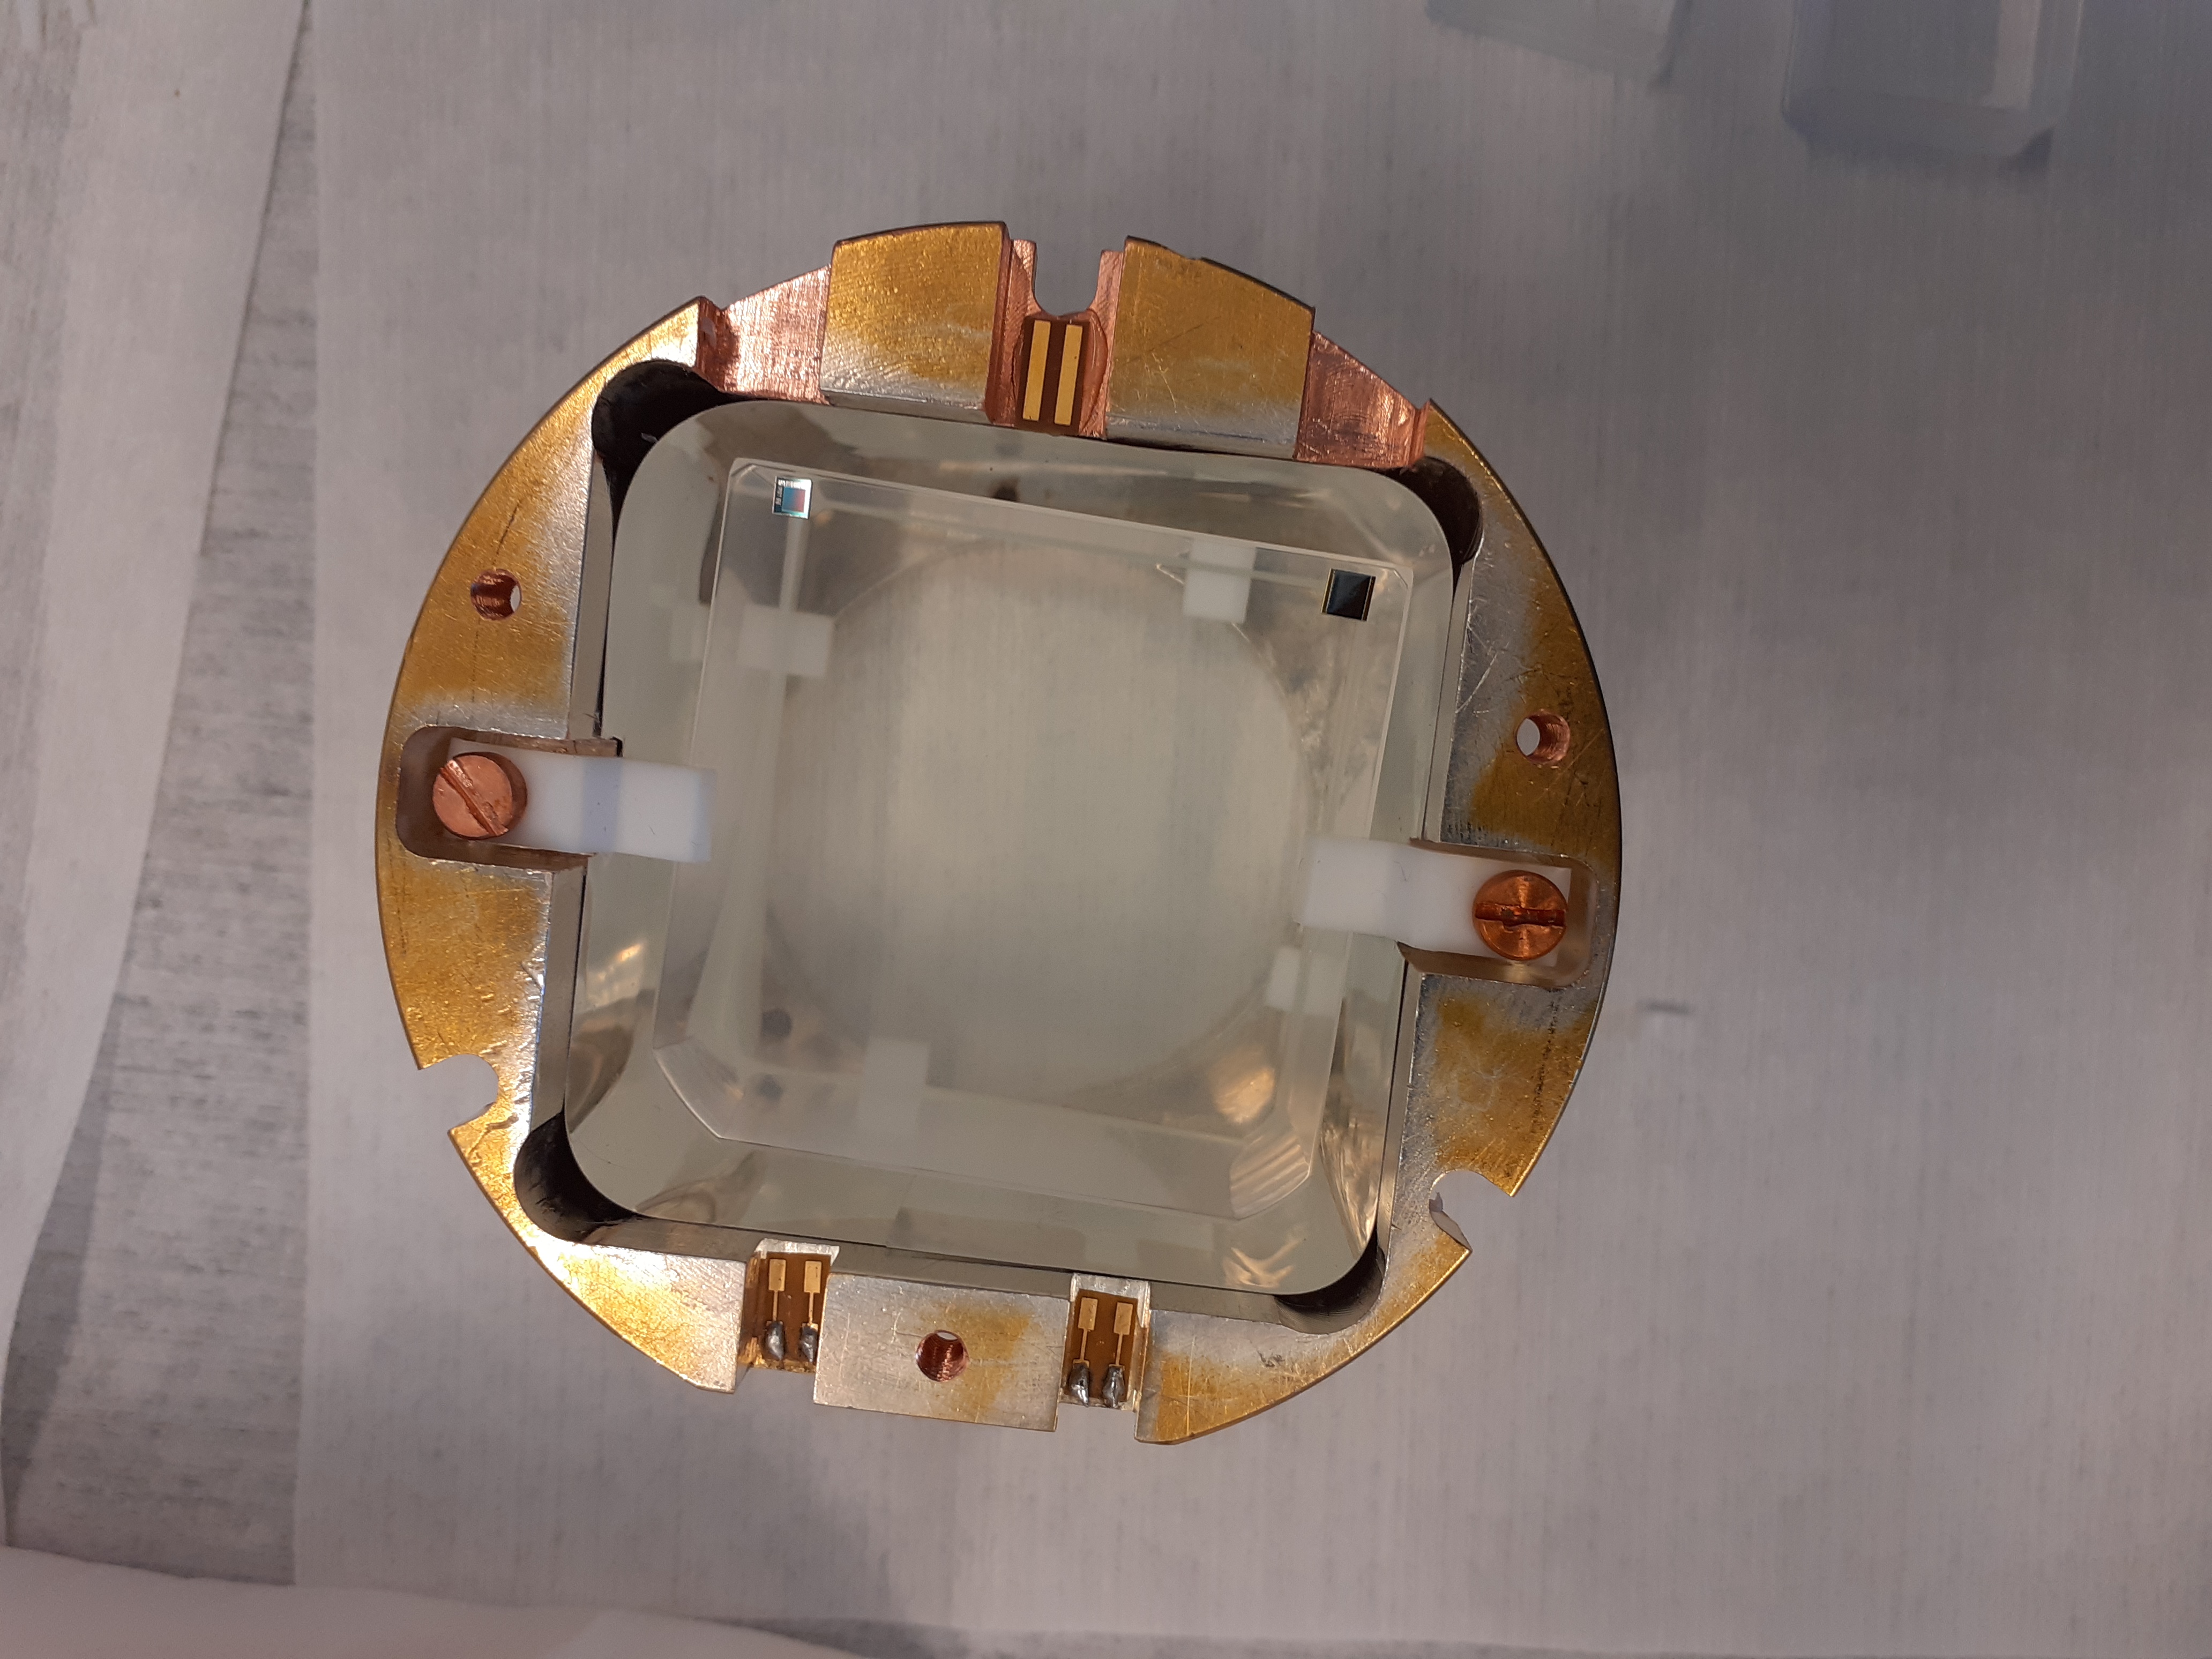 One of the first detectors tested on the new cryostat